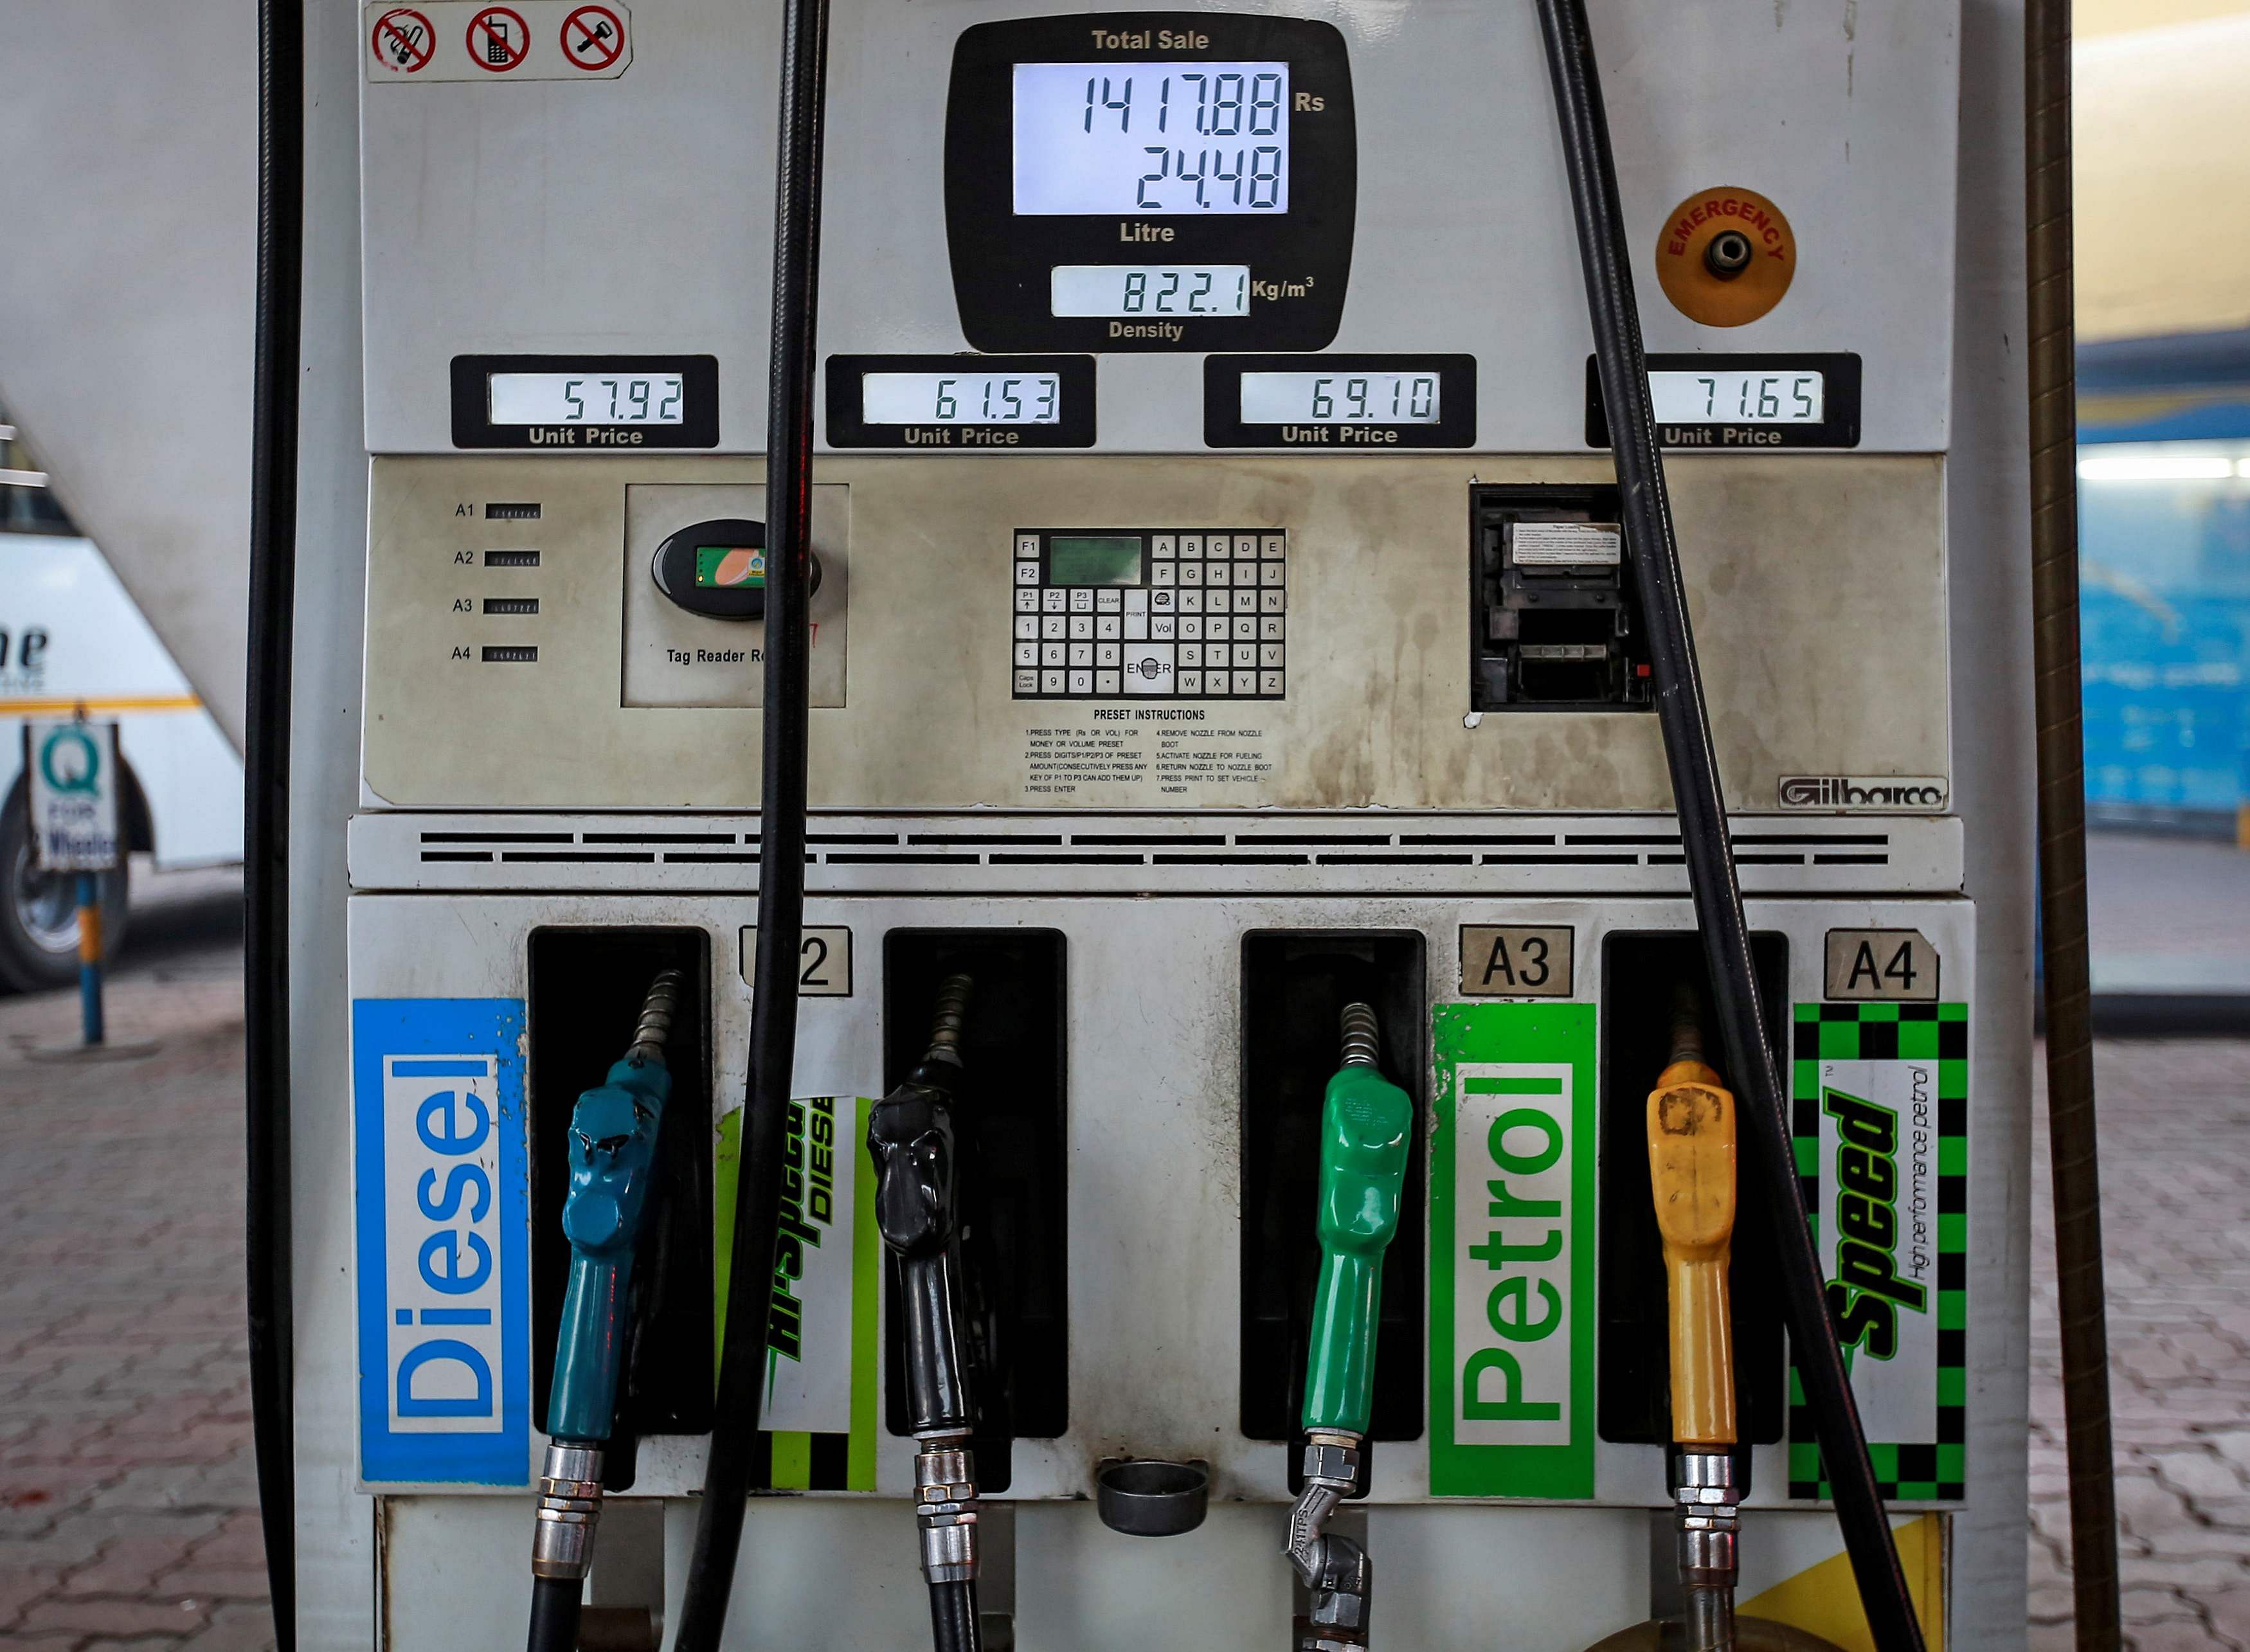 The cumulative increase in the price of fuels since oil marketing companies started raising the prices since June 7 now totals to Rs 9.12 for petrol and Rs 11 for diesel. Credit: Reuters